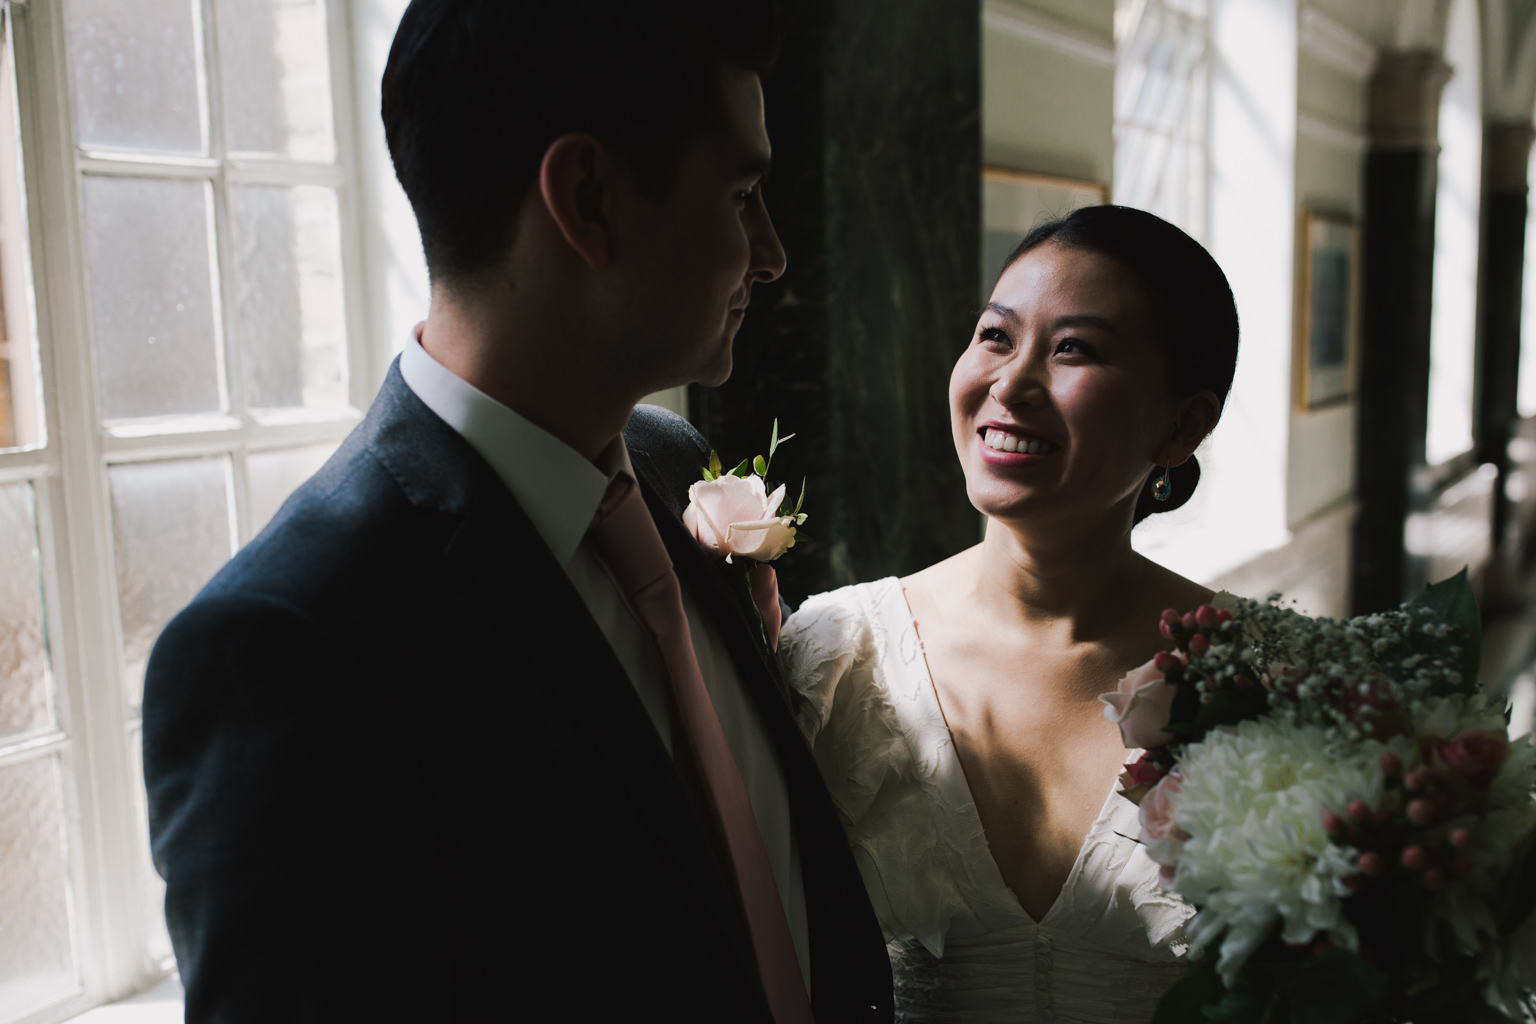 Bride and groom waiting to get married at an Islington Town Hall Elopement